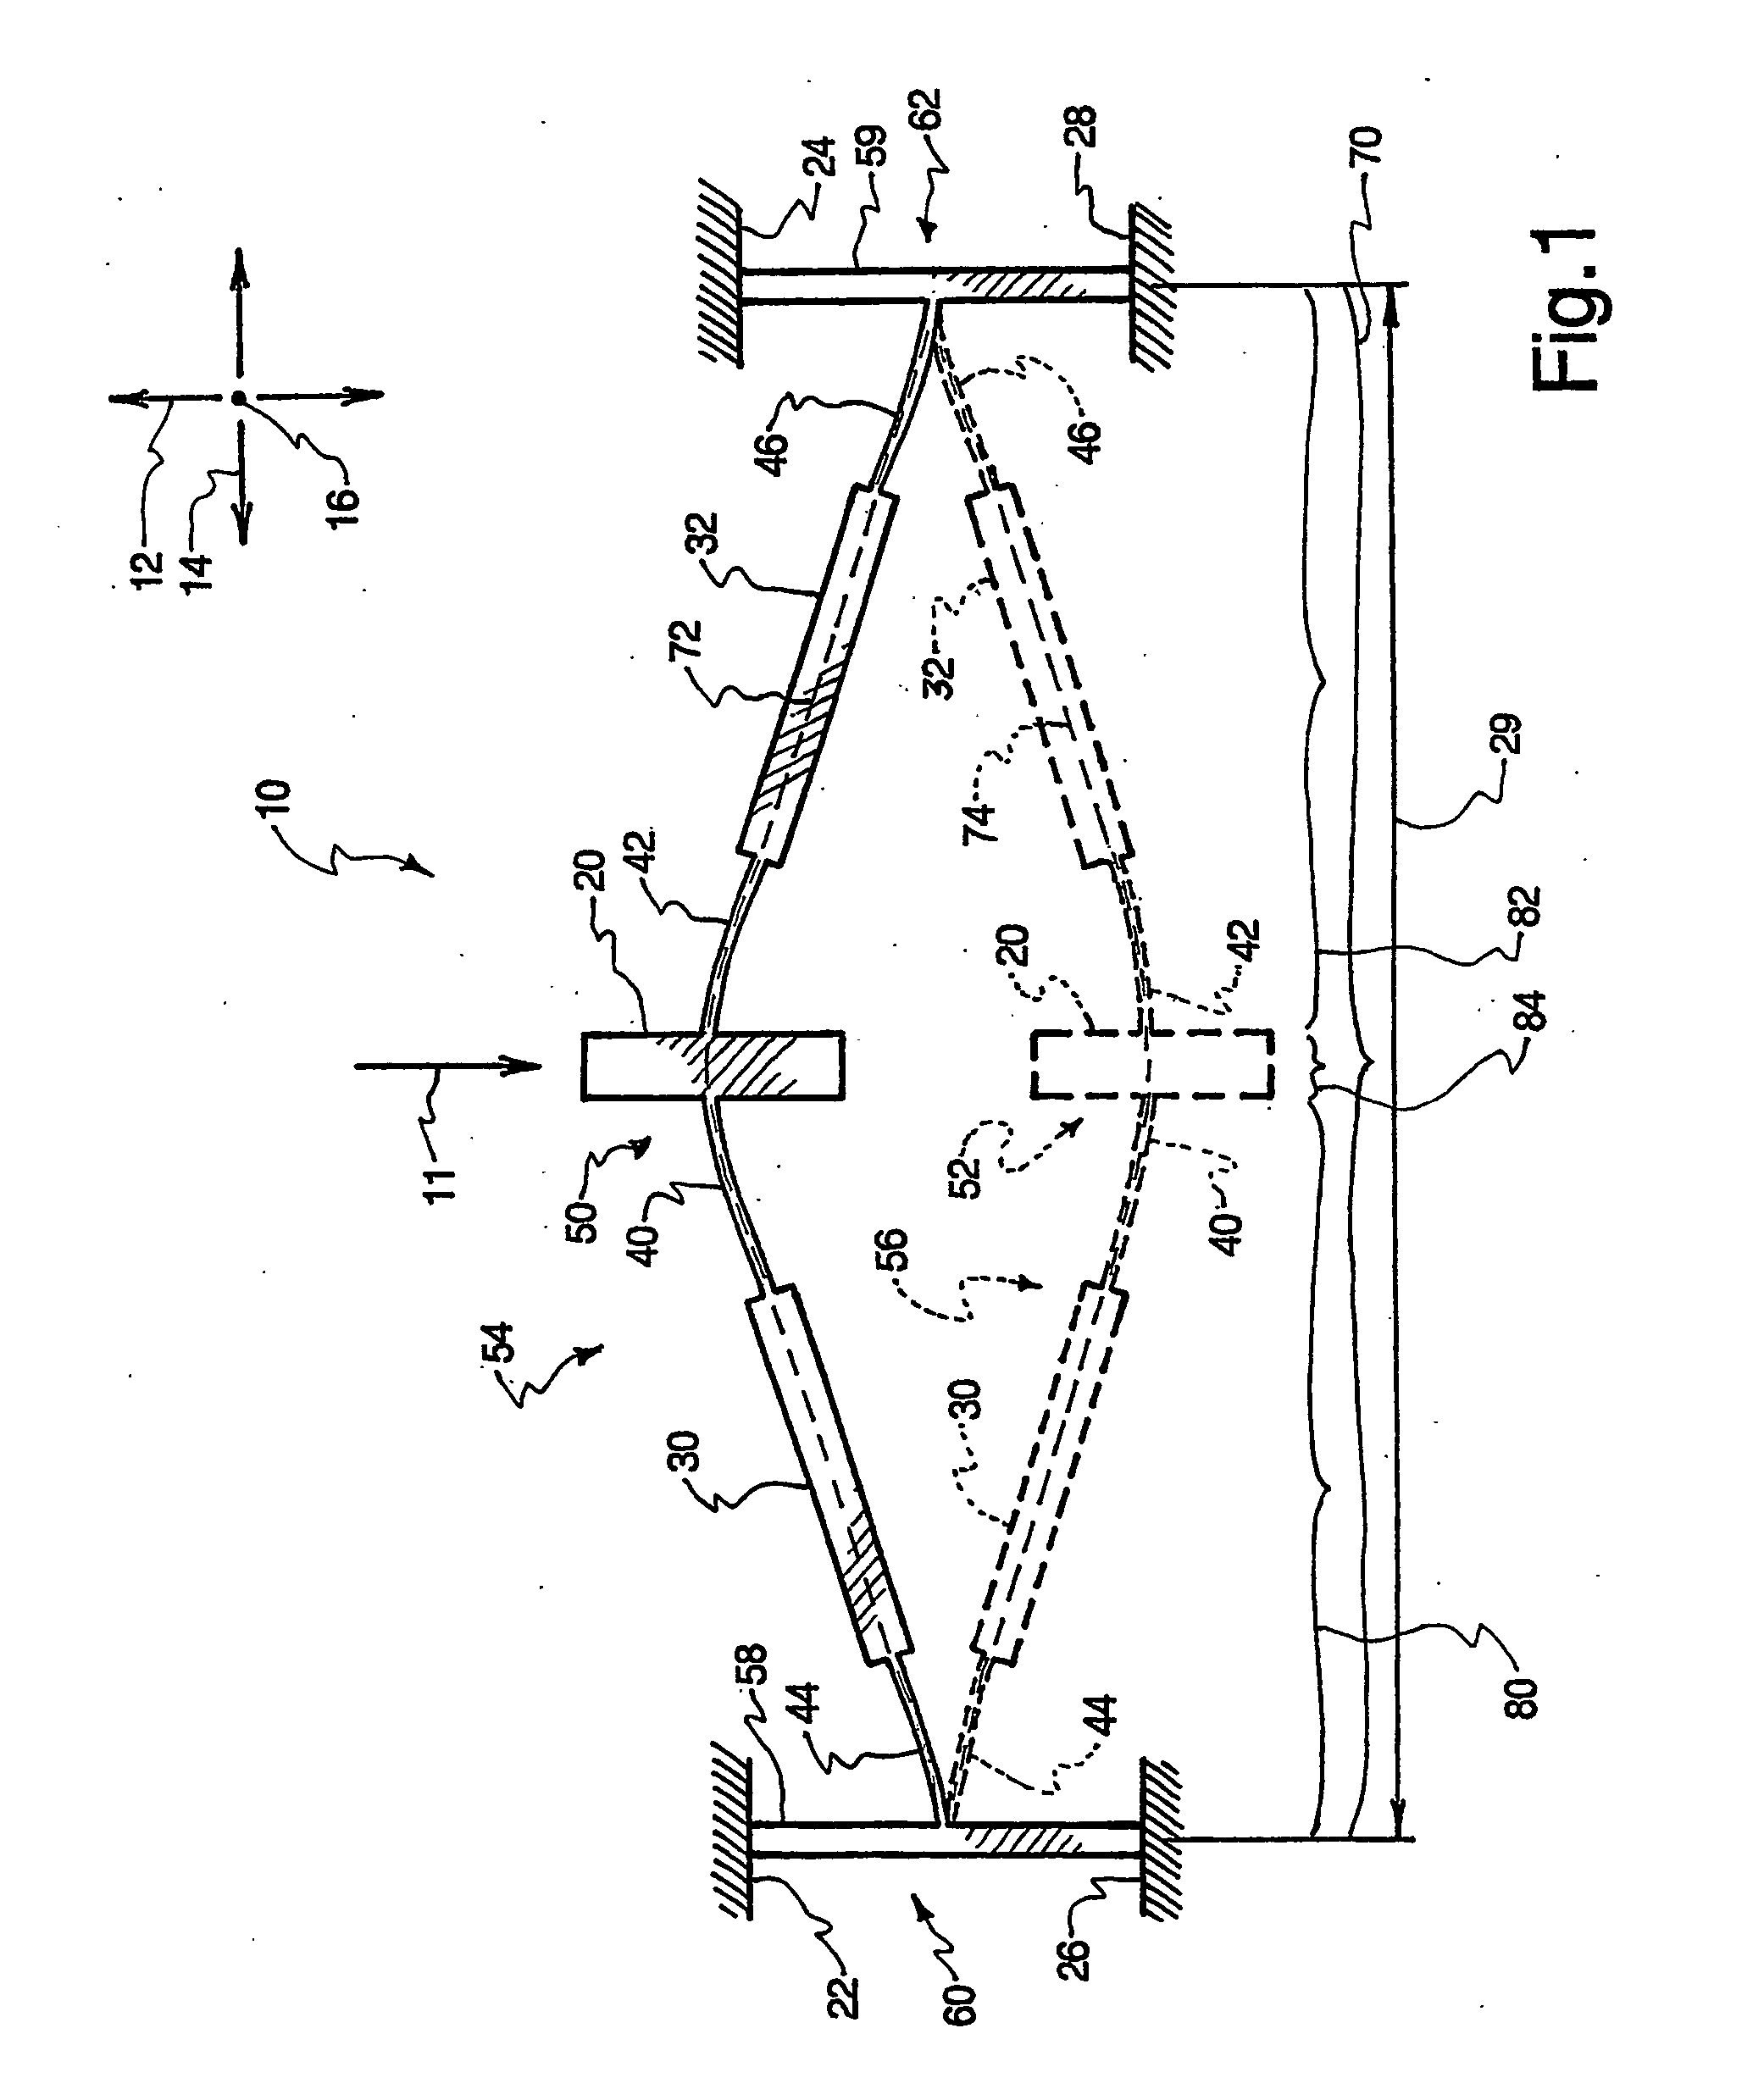 Dual position linear displacement micromechanism